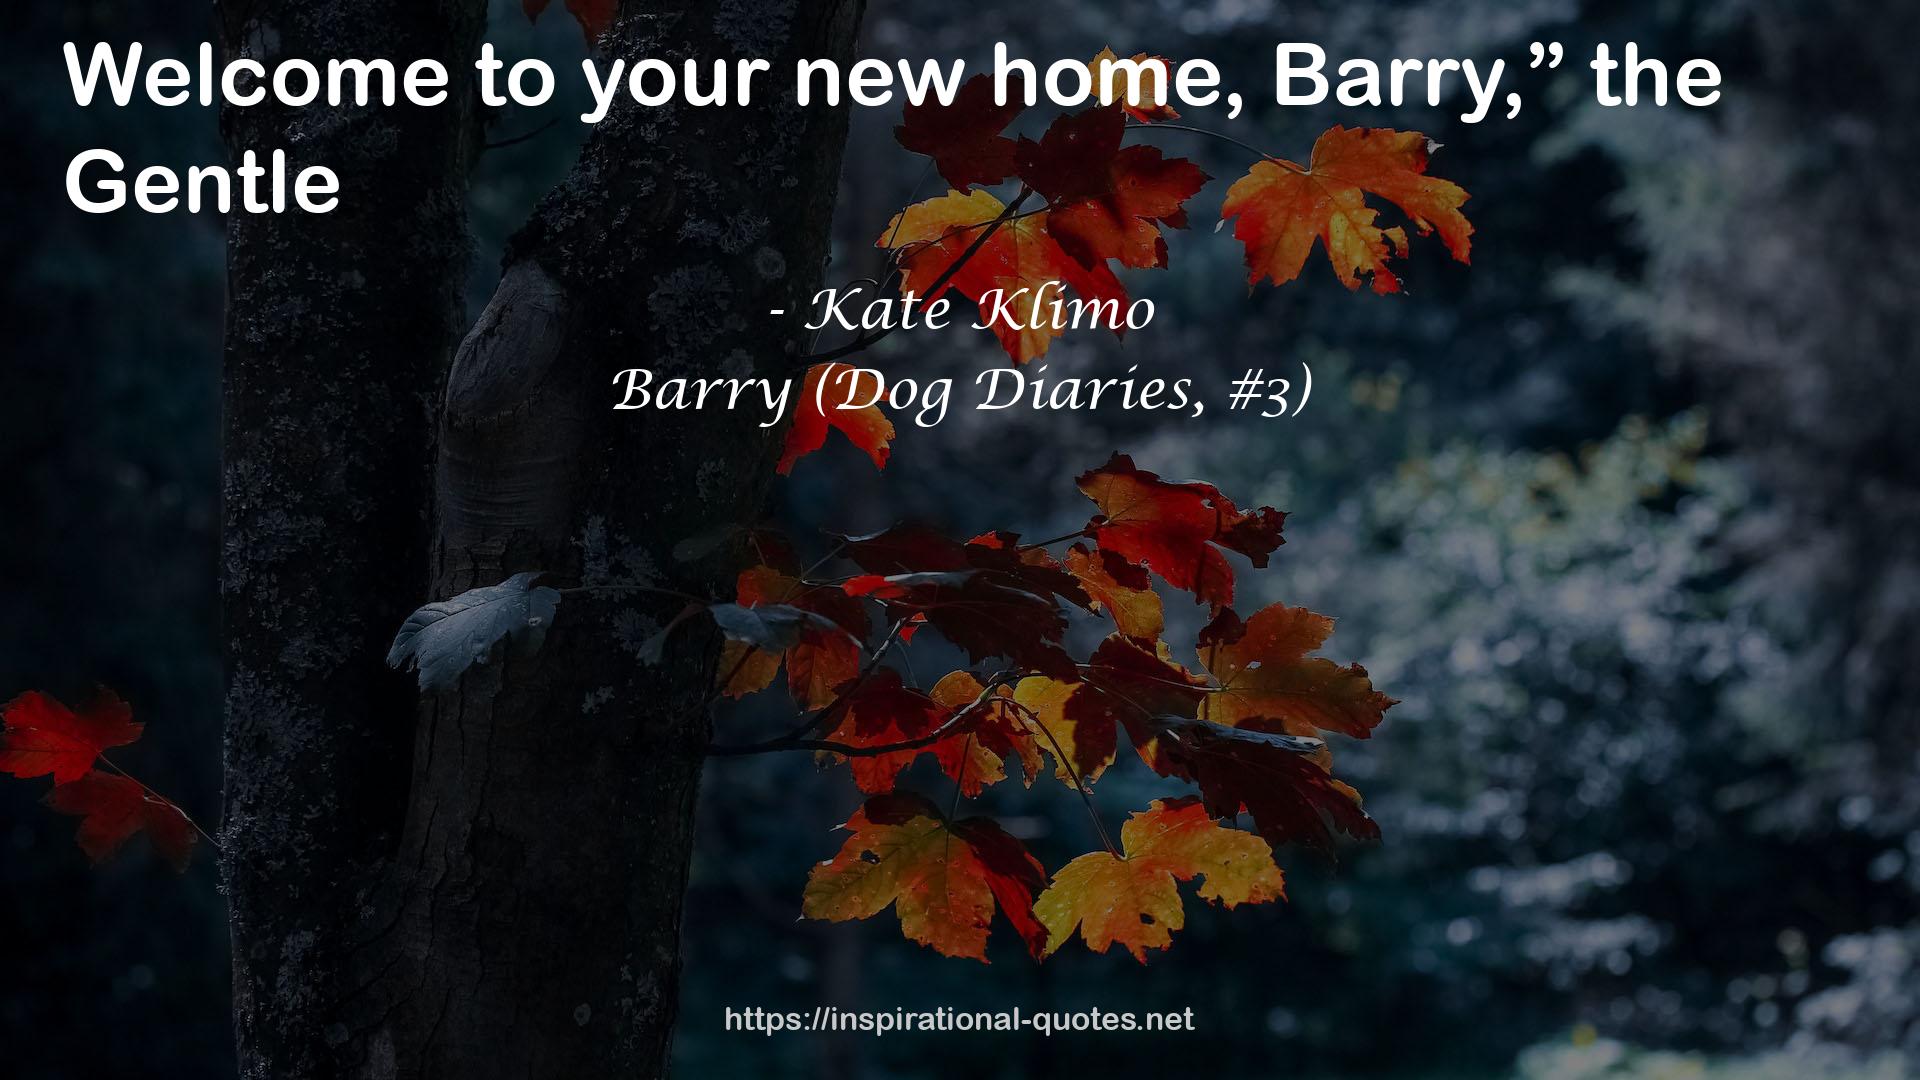 Barry (Dog Diaries, #3) QUOTES